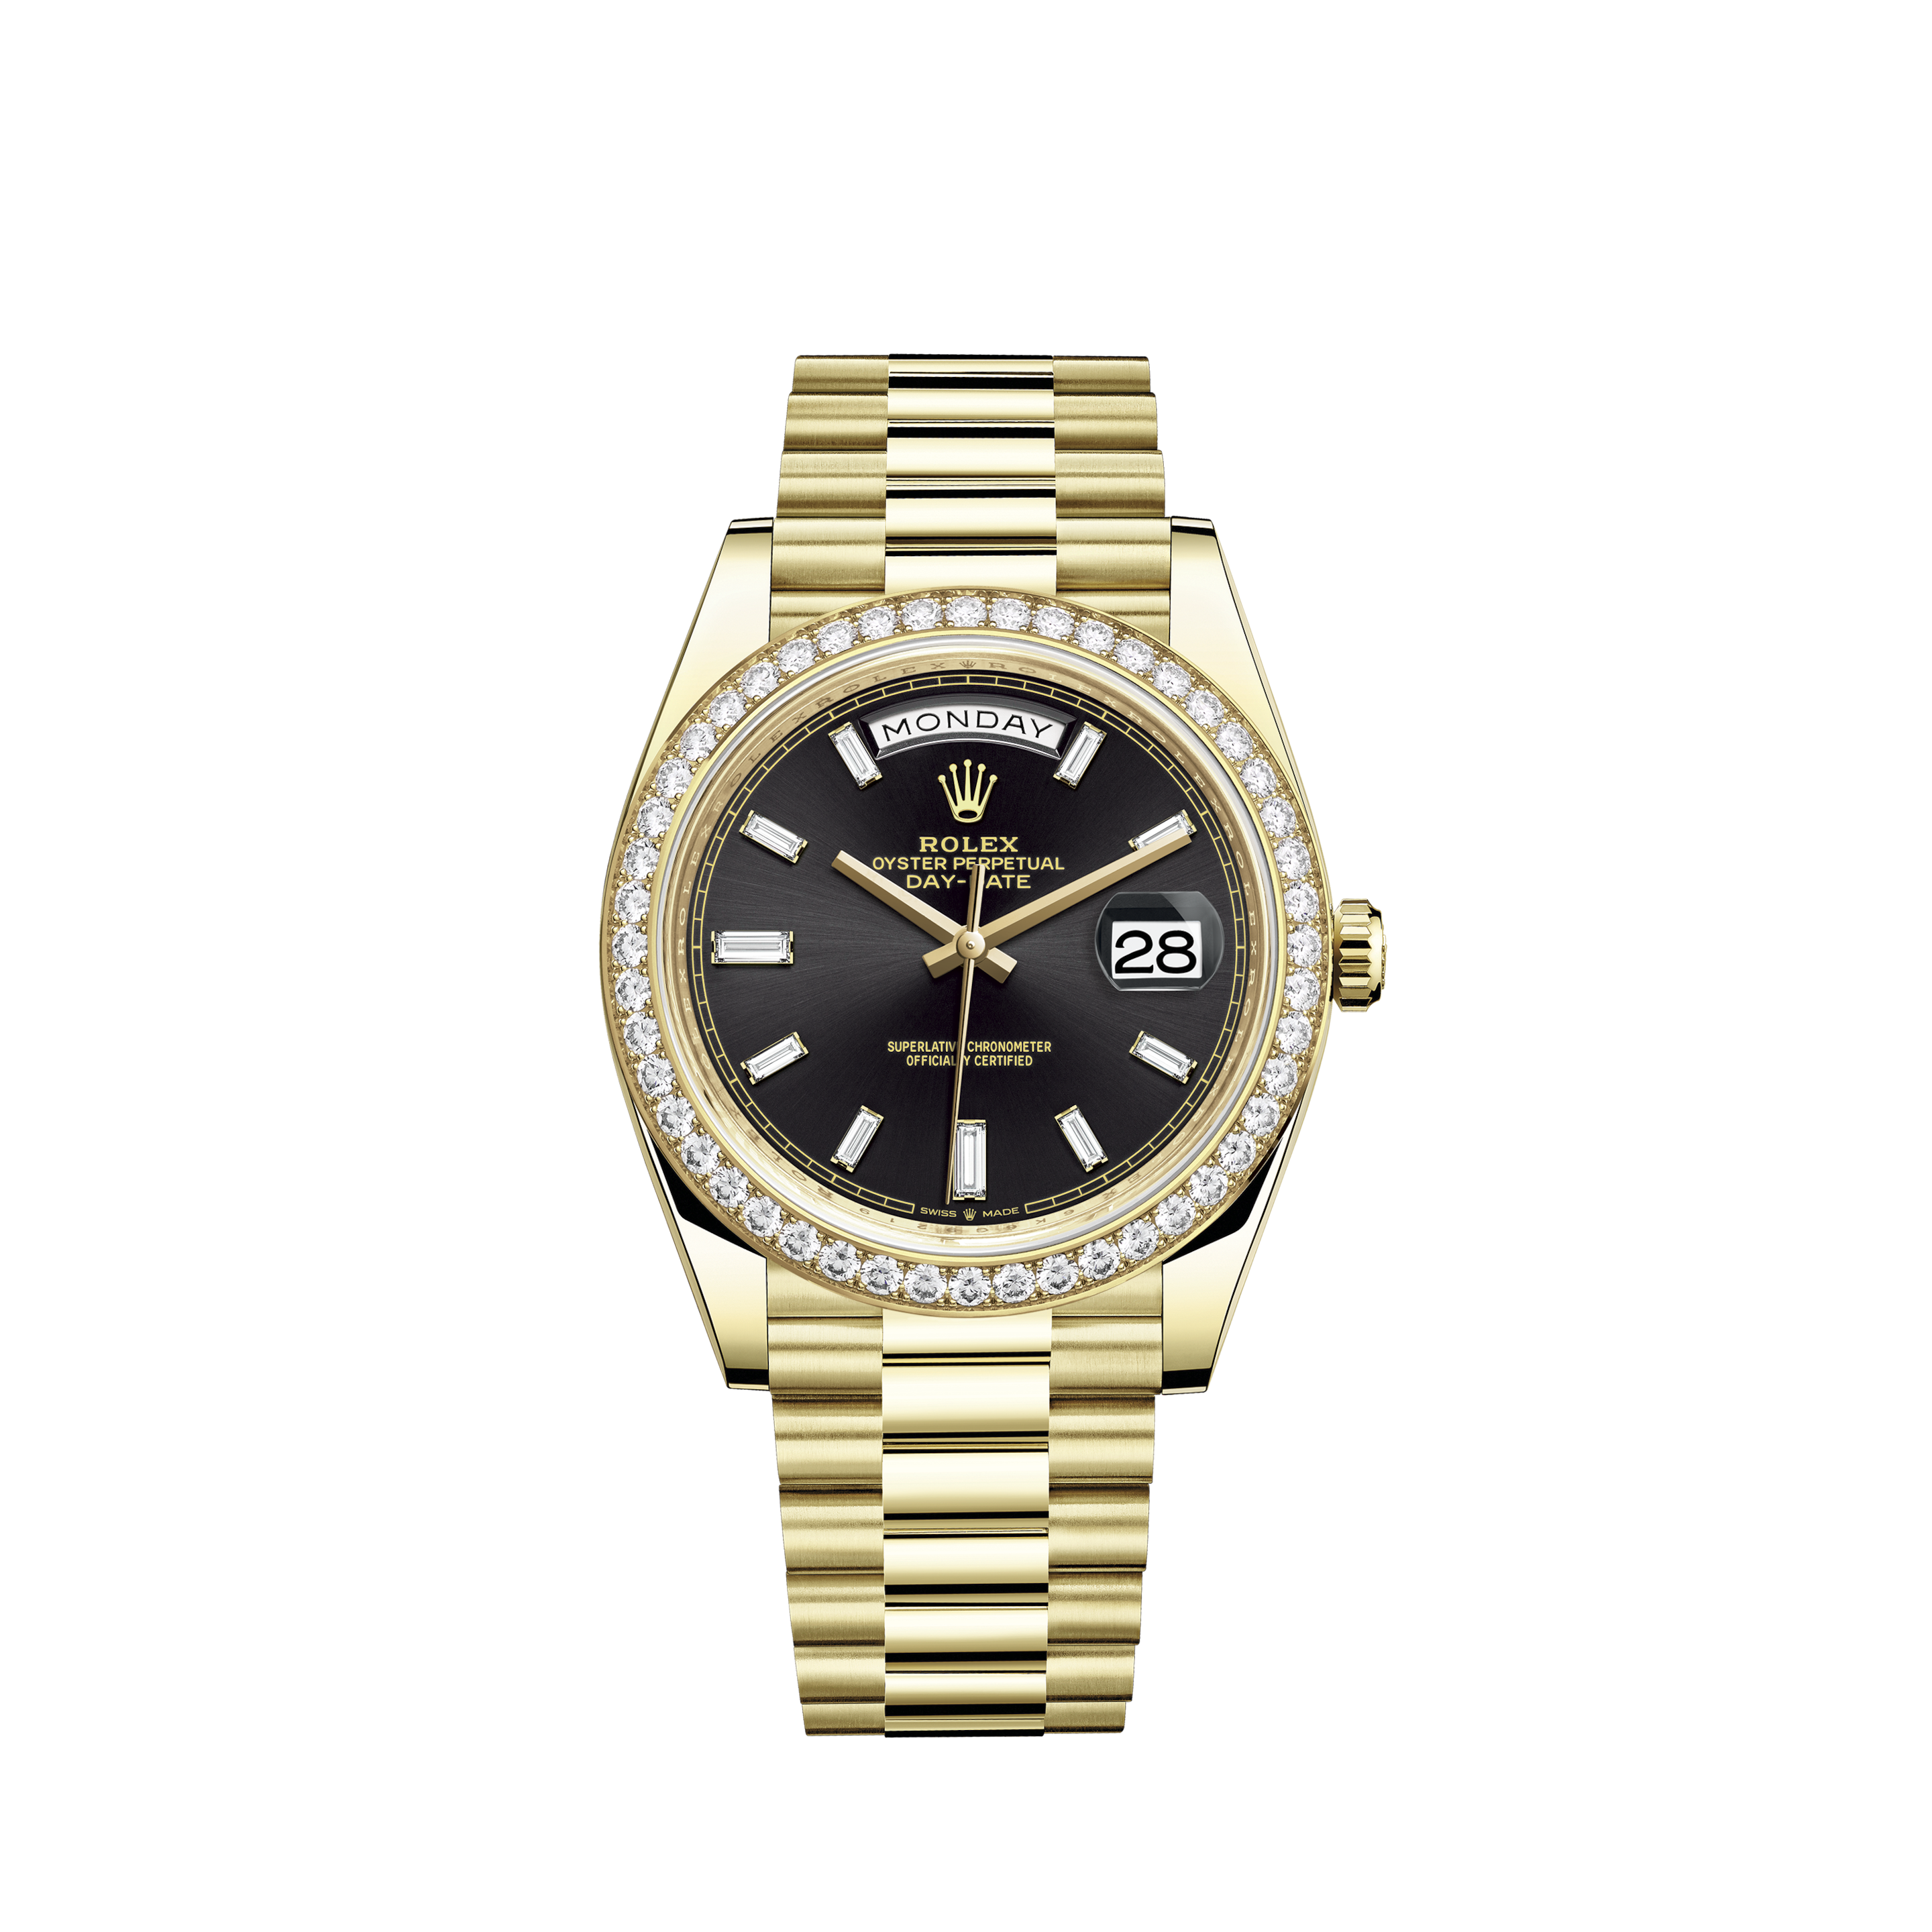 Rolex Oyster Perpetual Datejust 16233 36mm Steel Gold Diamond 1YearWTY #1165-4Rolex Oyster Perpetual Datejust 16233 36mm Steel Gold MOP Diamond 1YrWTY #1165-1